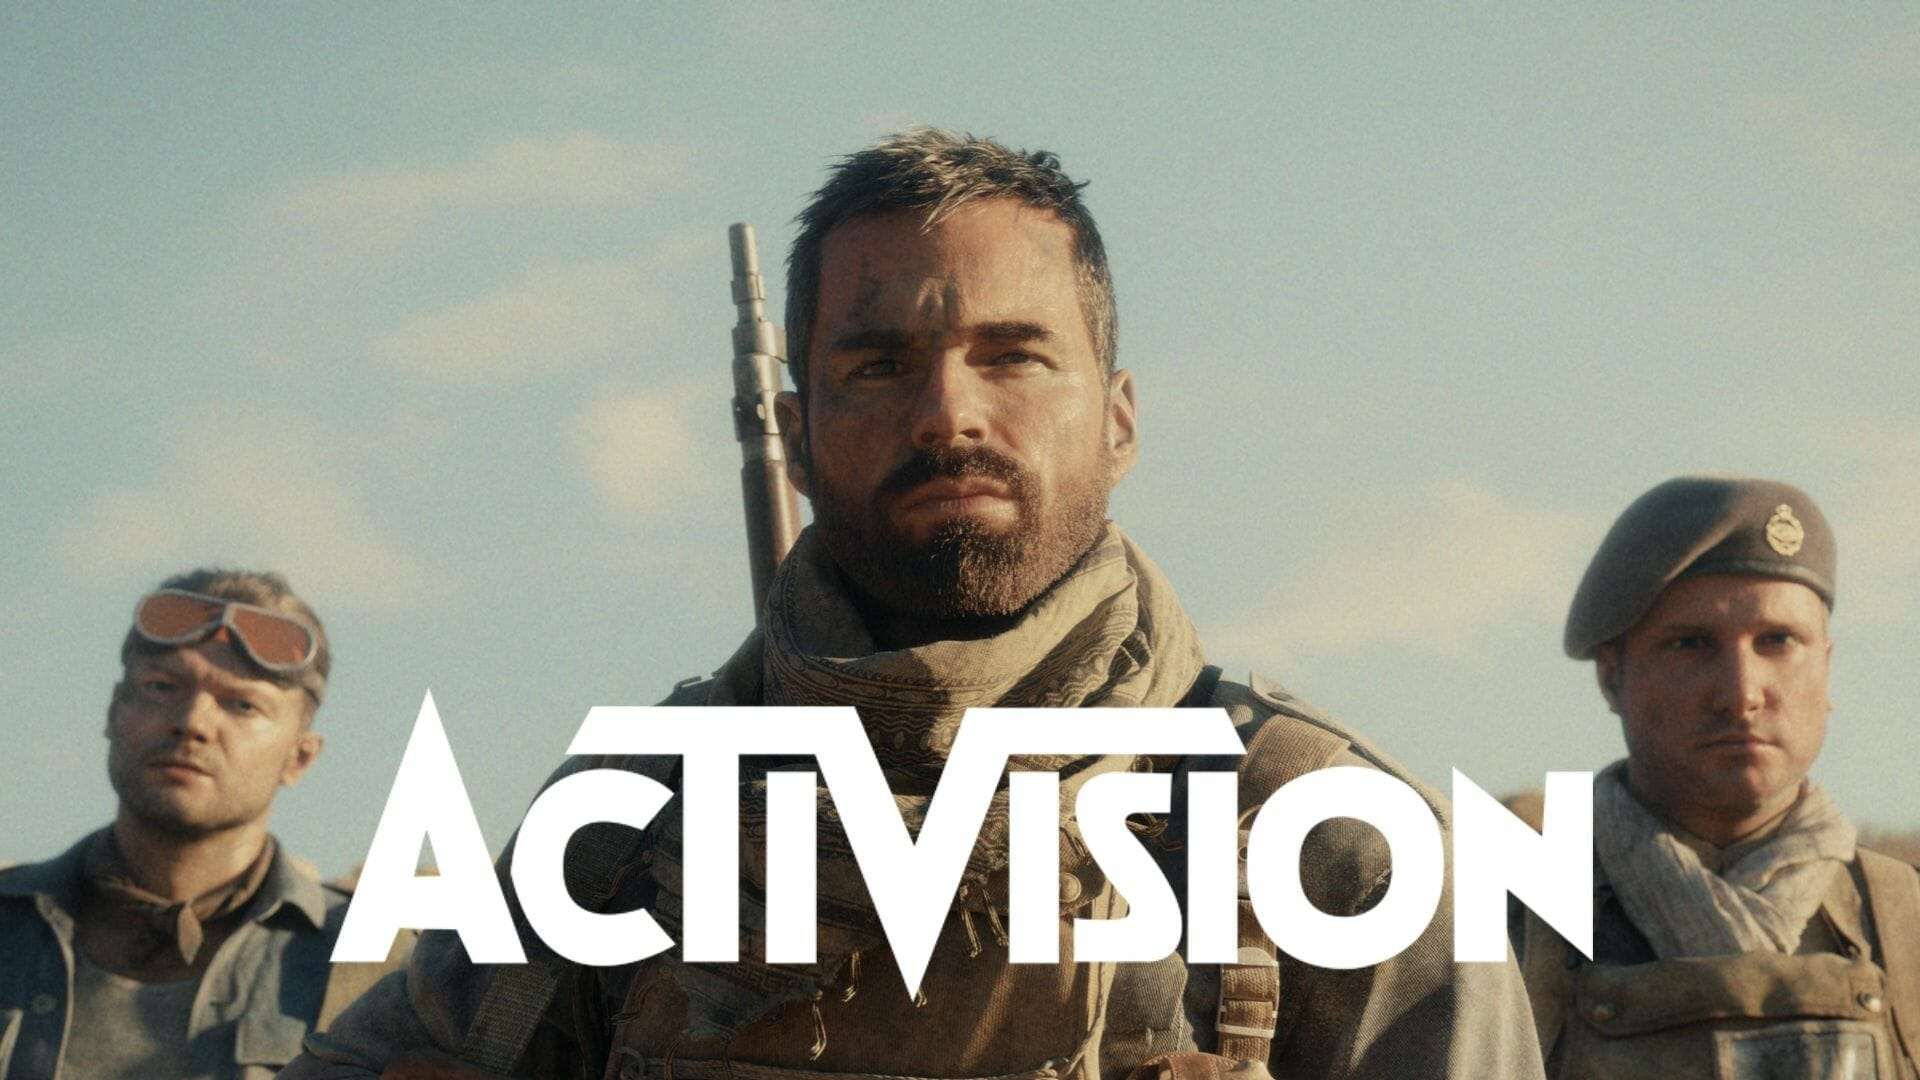 lucas riggs and other characters with activision logo over them